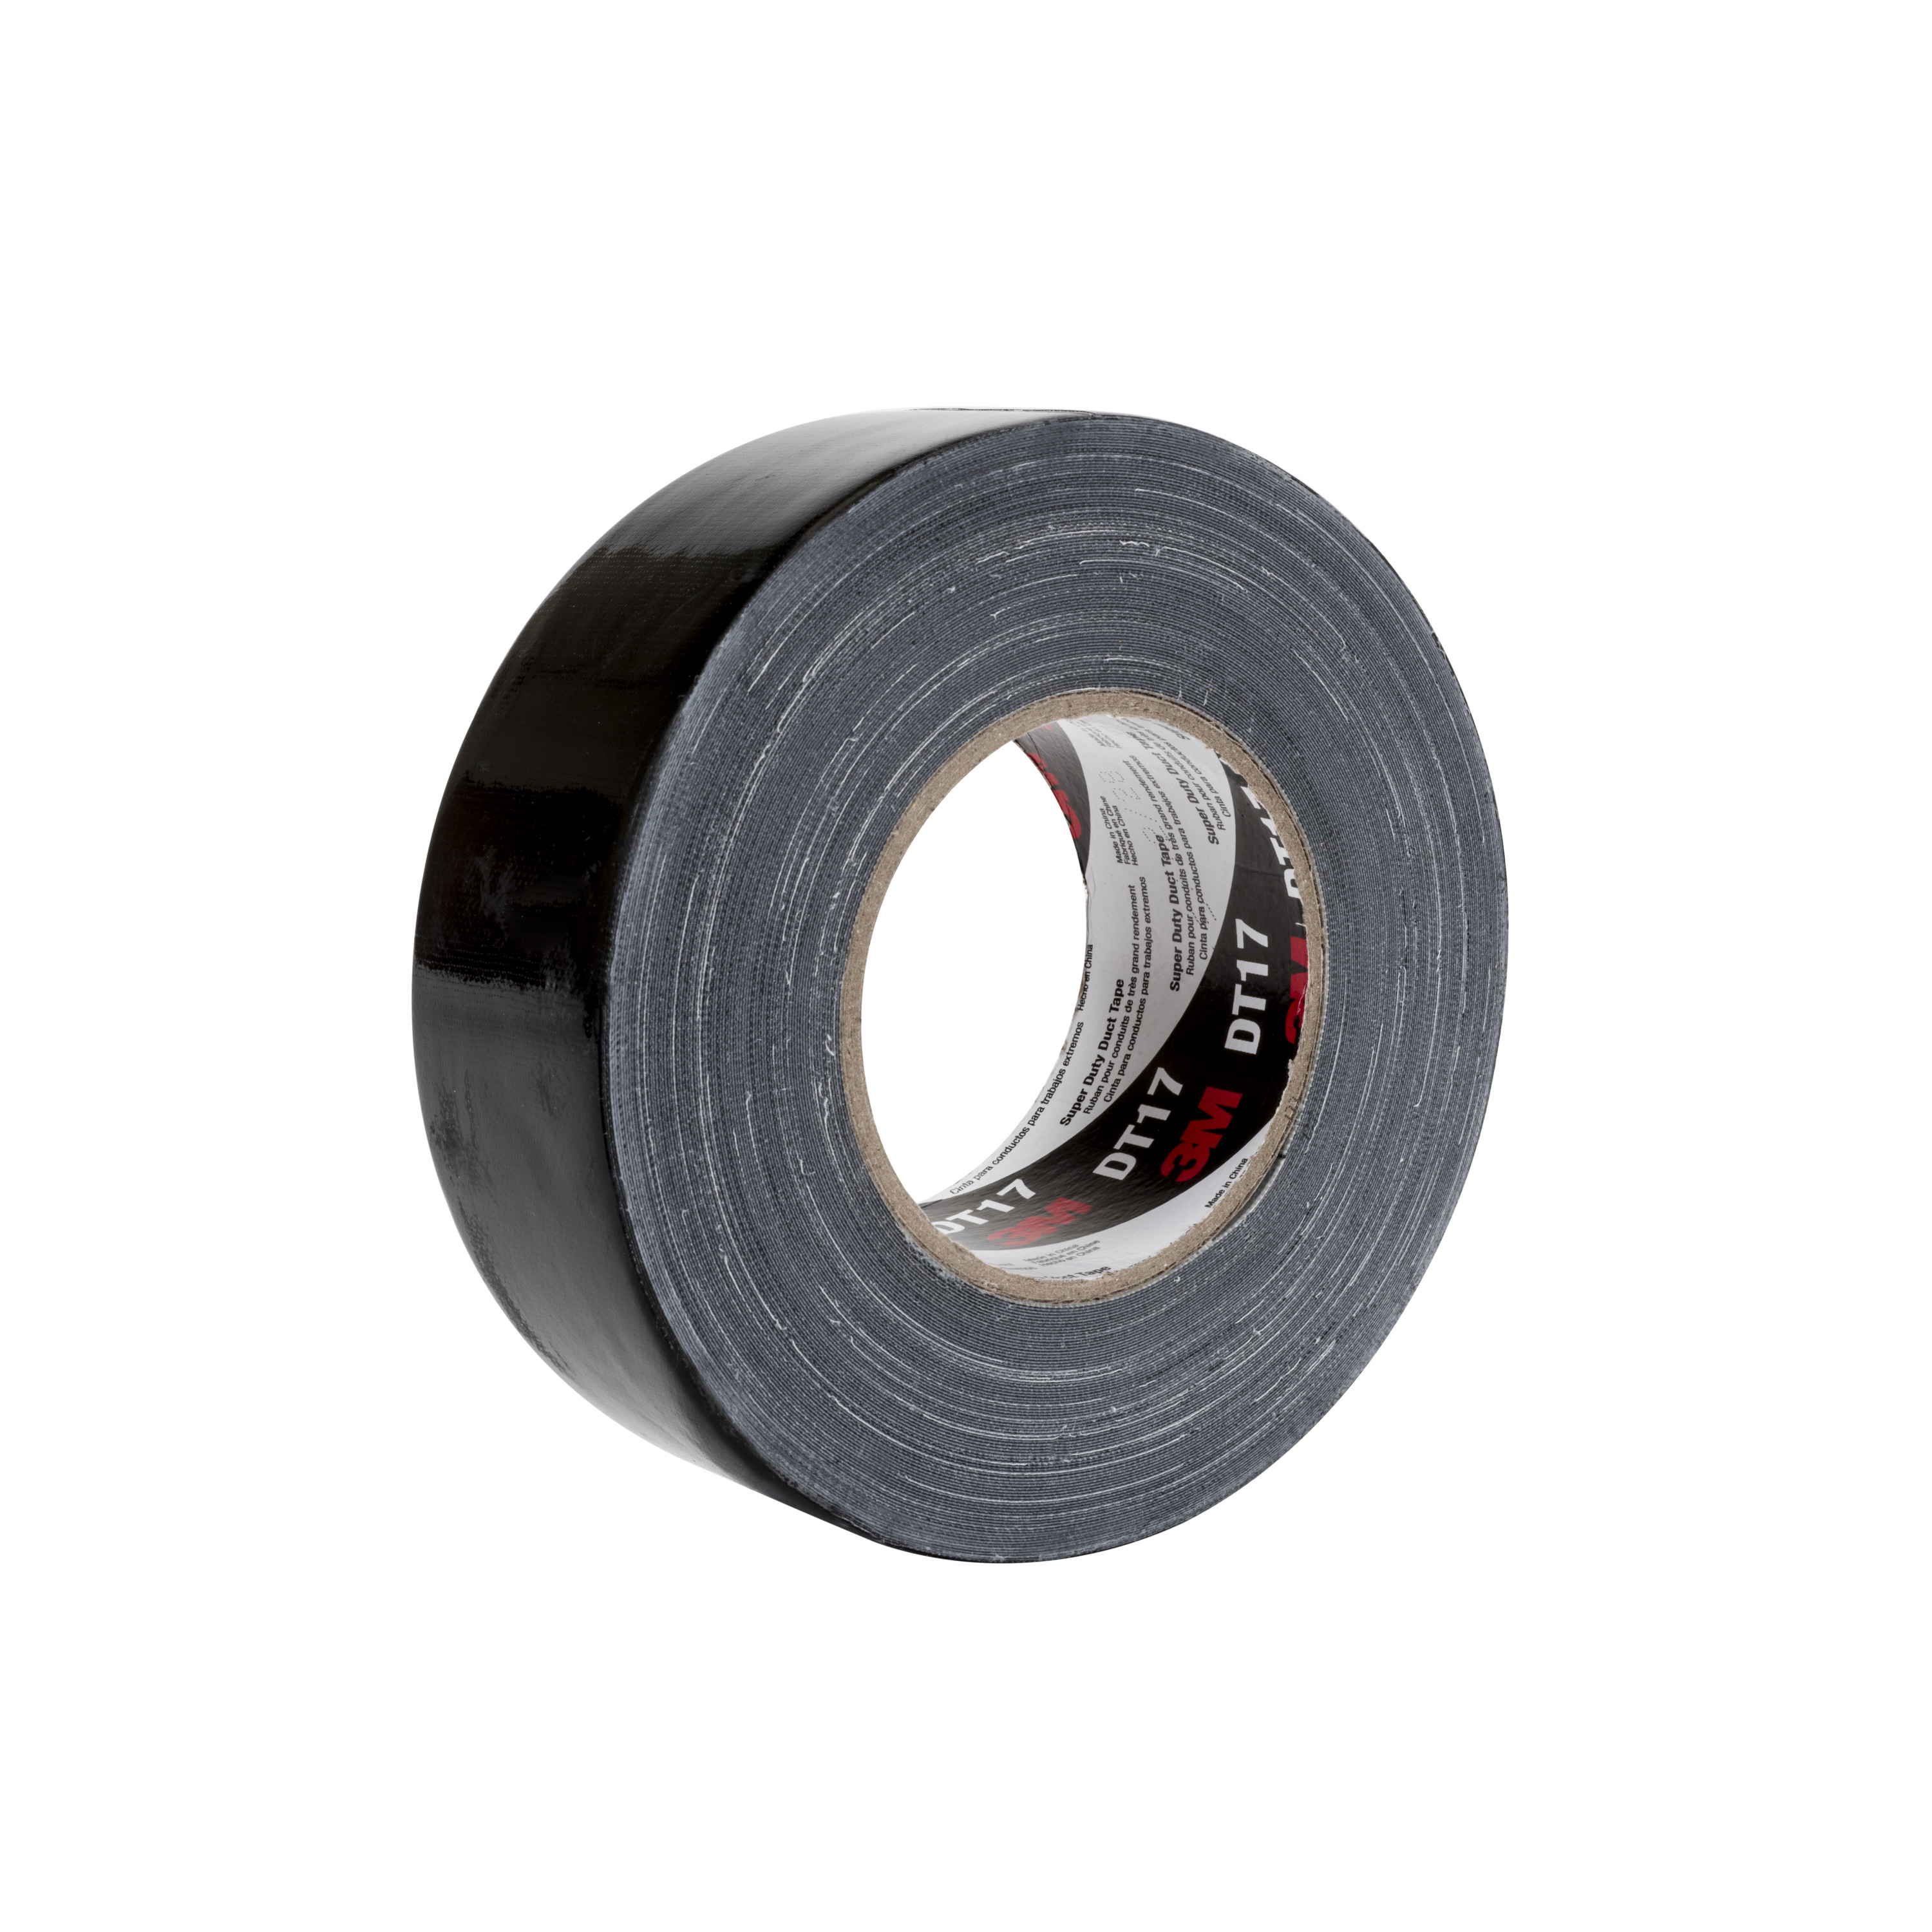 3M™ Super Duty Duct Tape DT17, Black, 48 mm x 32 m, 17 mil, 24 rolls per
case, Individually Wrapped Conveniently Packaged